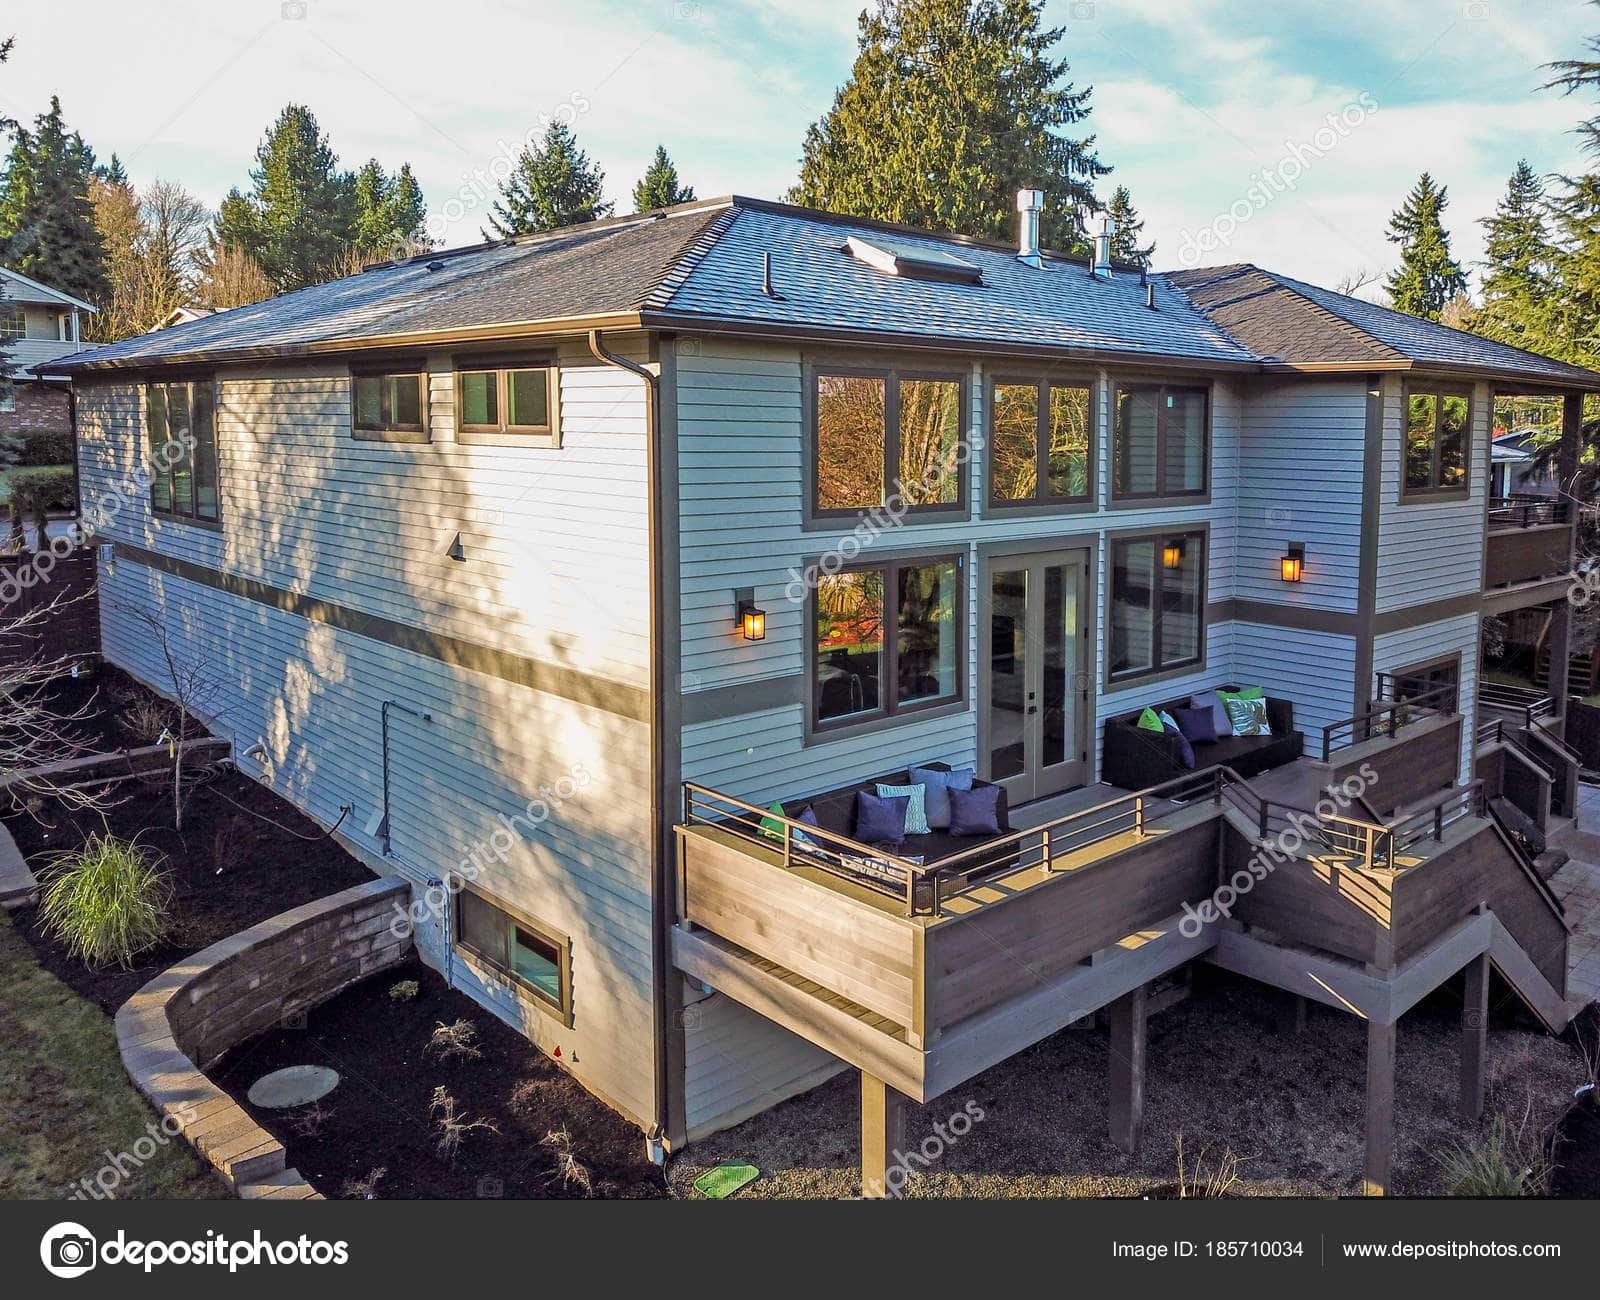 New construction home exterior boasts luxury oversized deck overlooking a Well-designed garden.